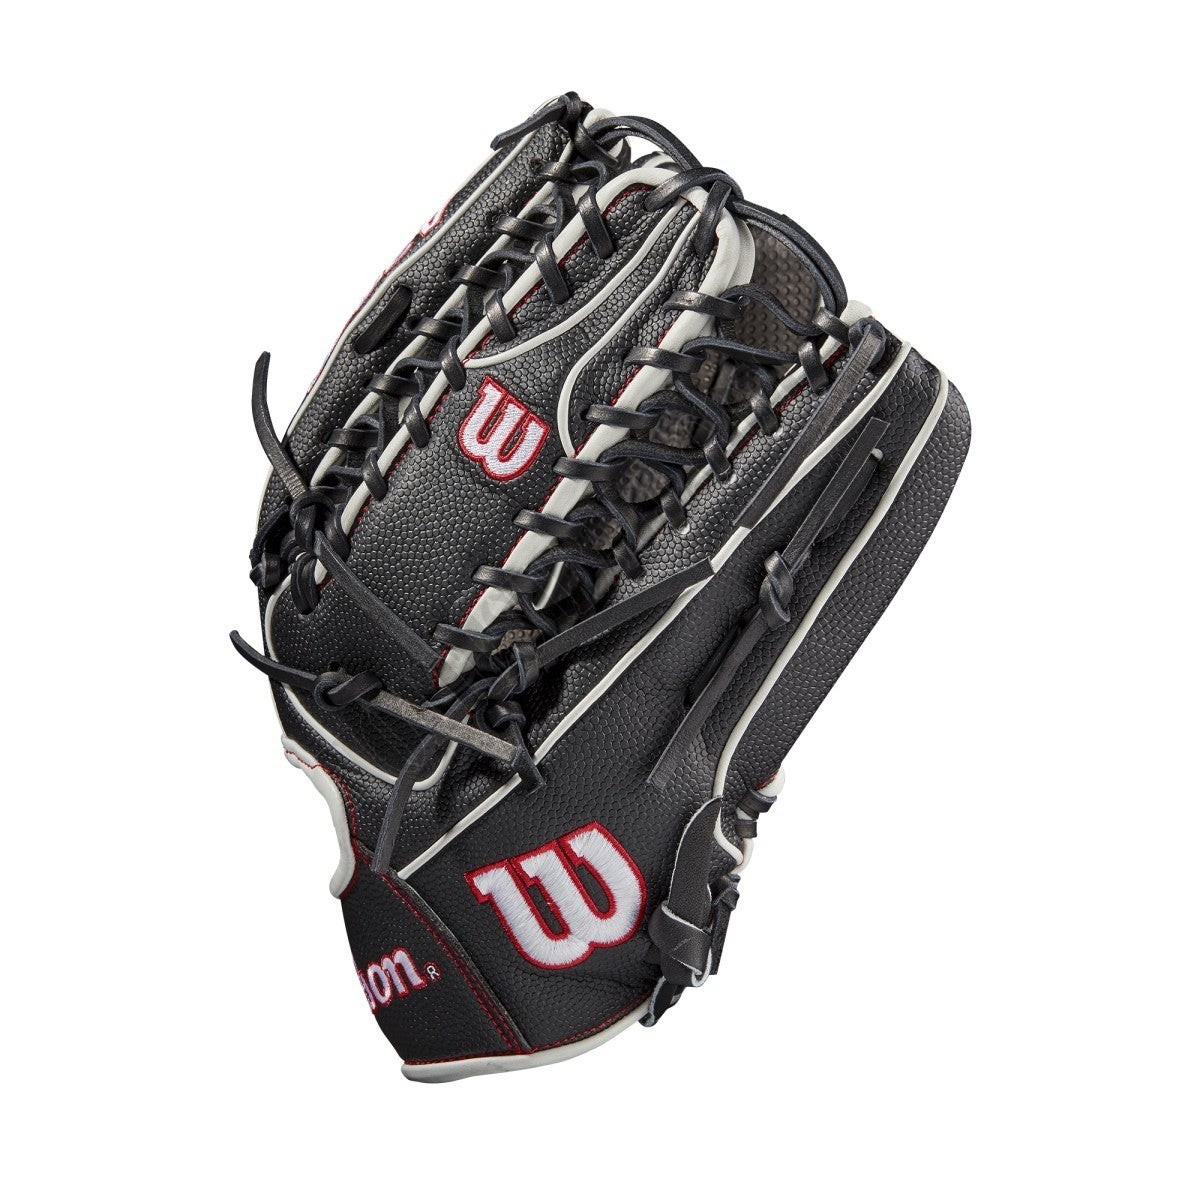 2021 A2000 SCOT7SS 12.75" Outfield Baseball Glove ● Wilson Promotions - -3